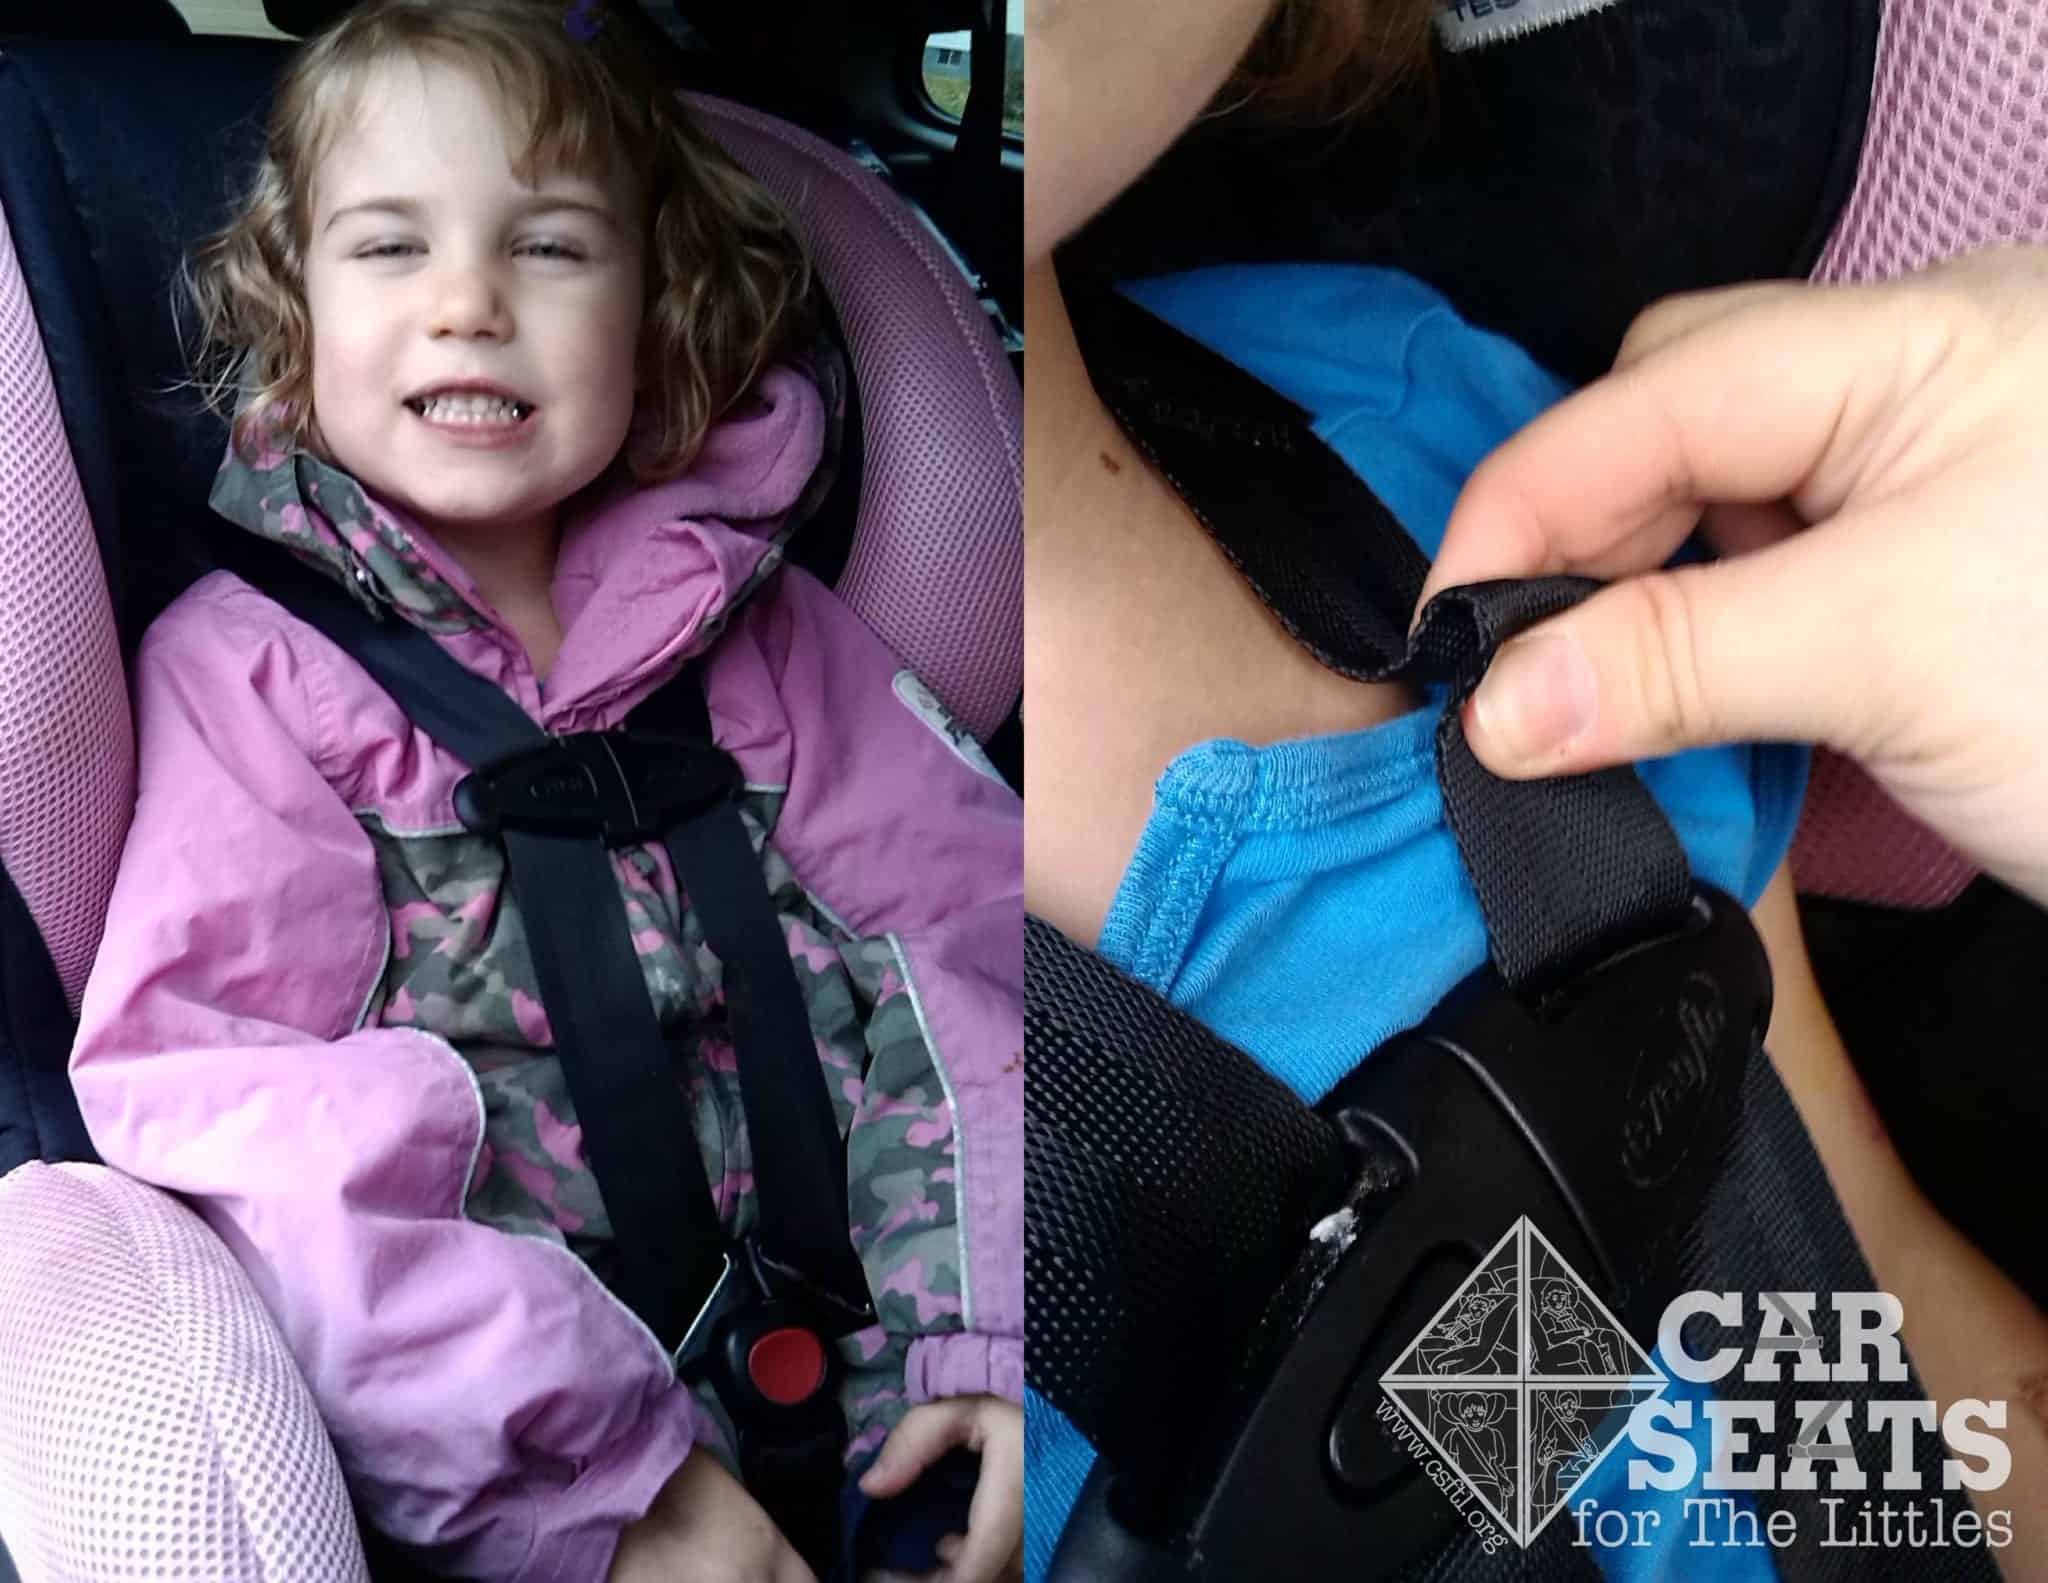 Police warn parents of dangers of winter coats and child car seats